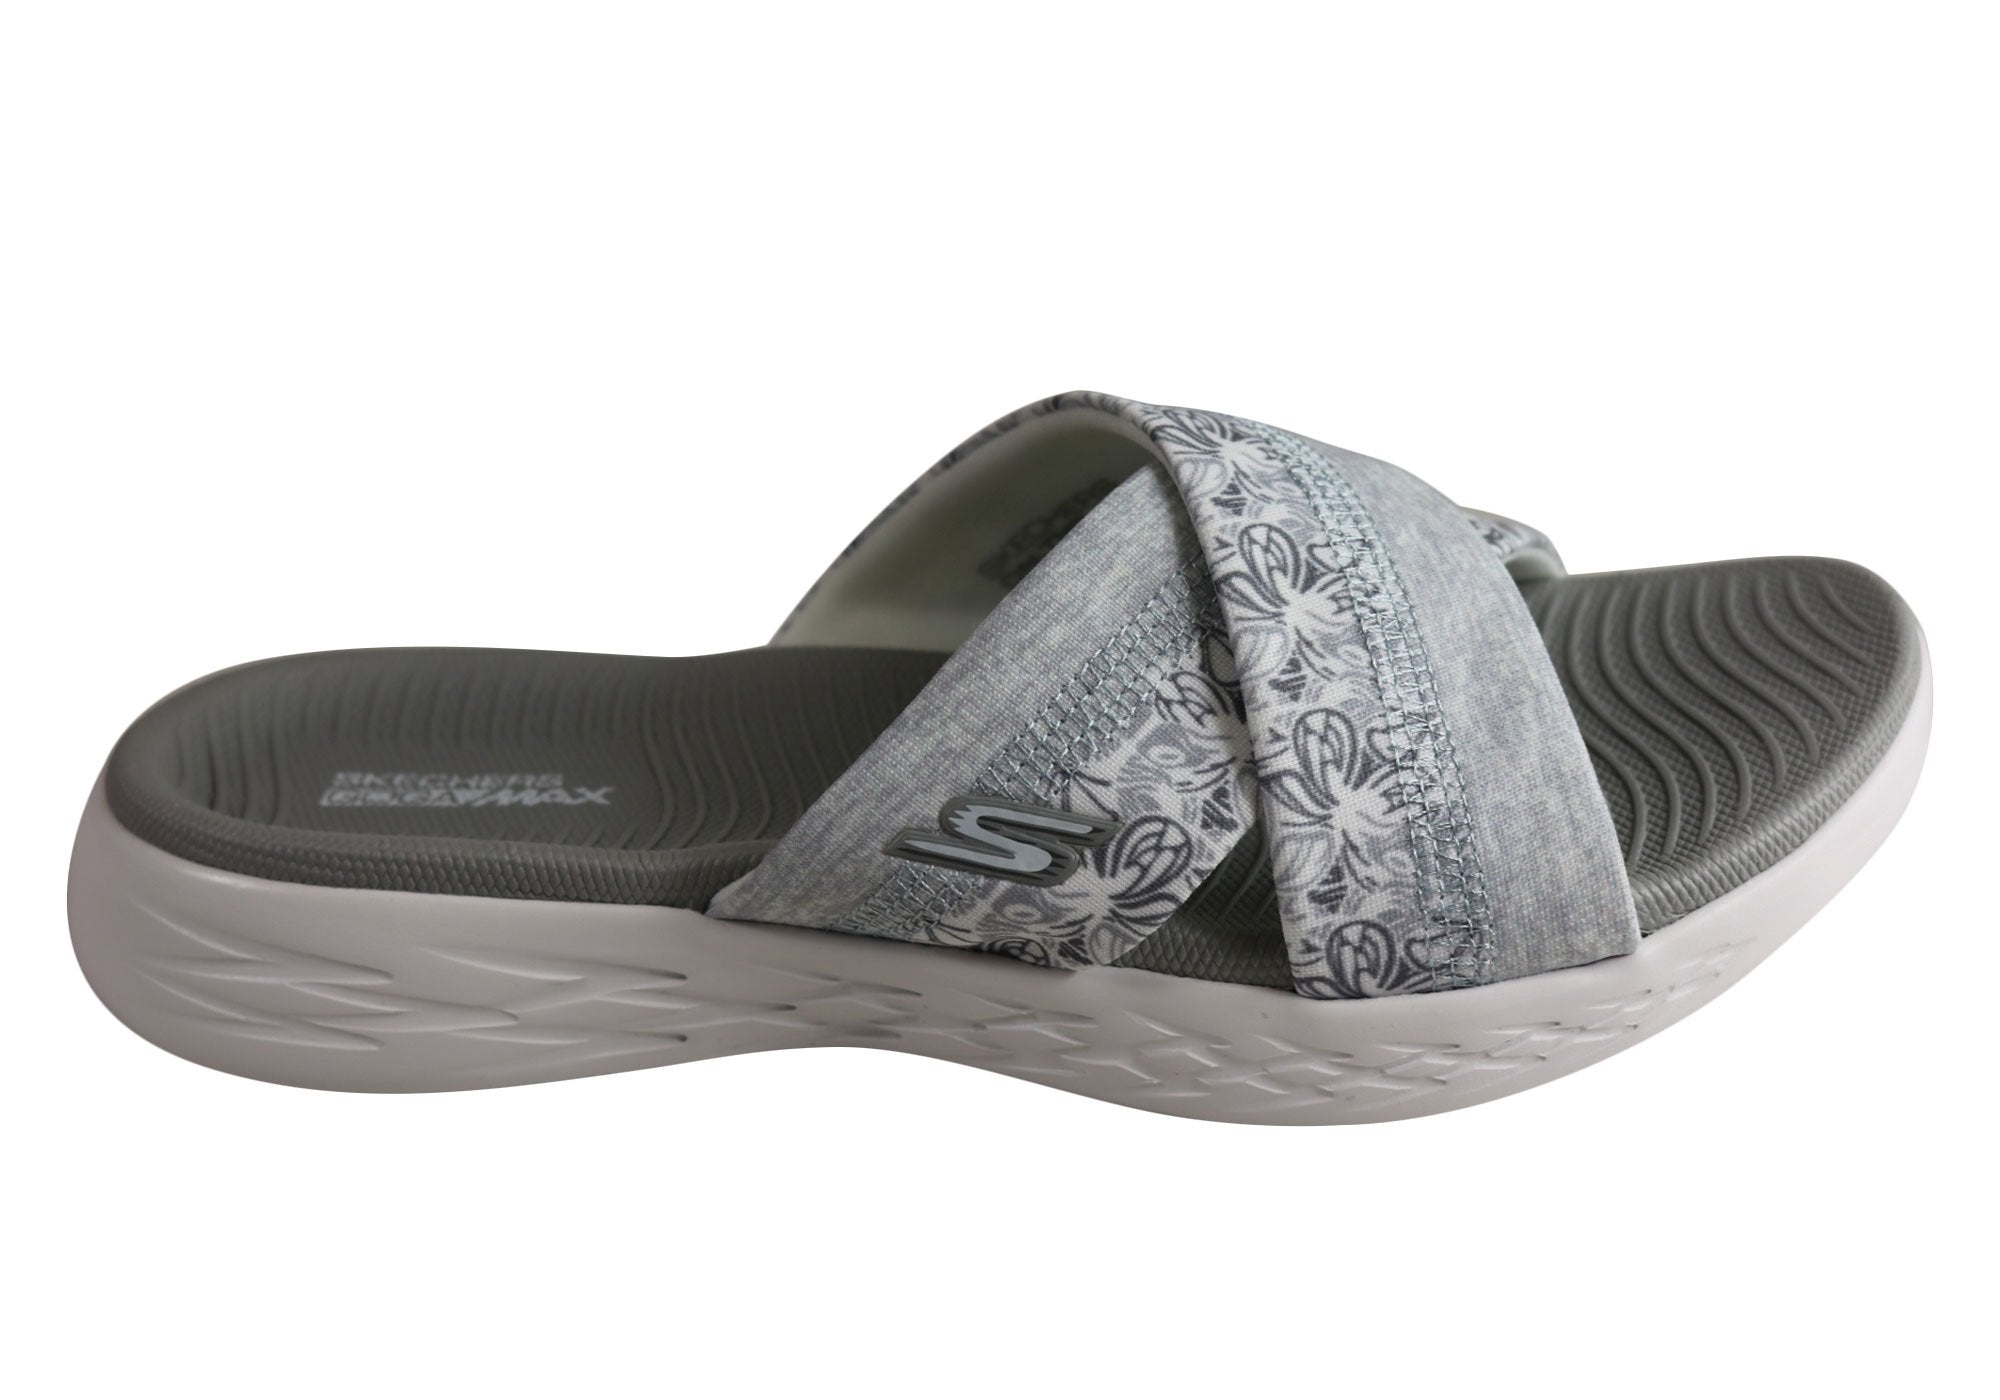 skechers on the go 600 monarch sandals